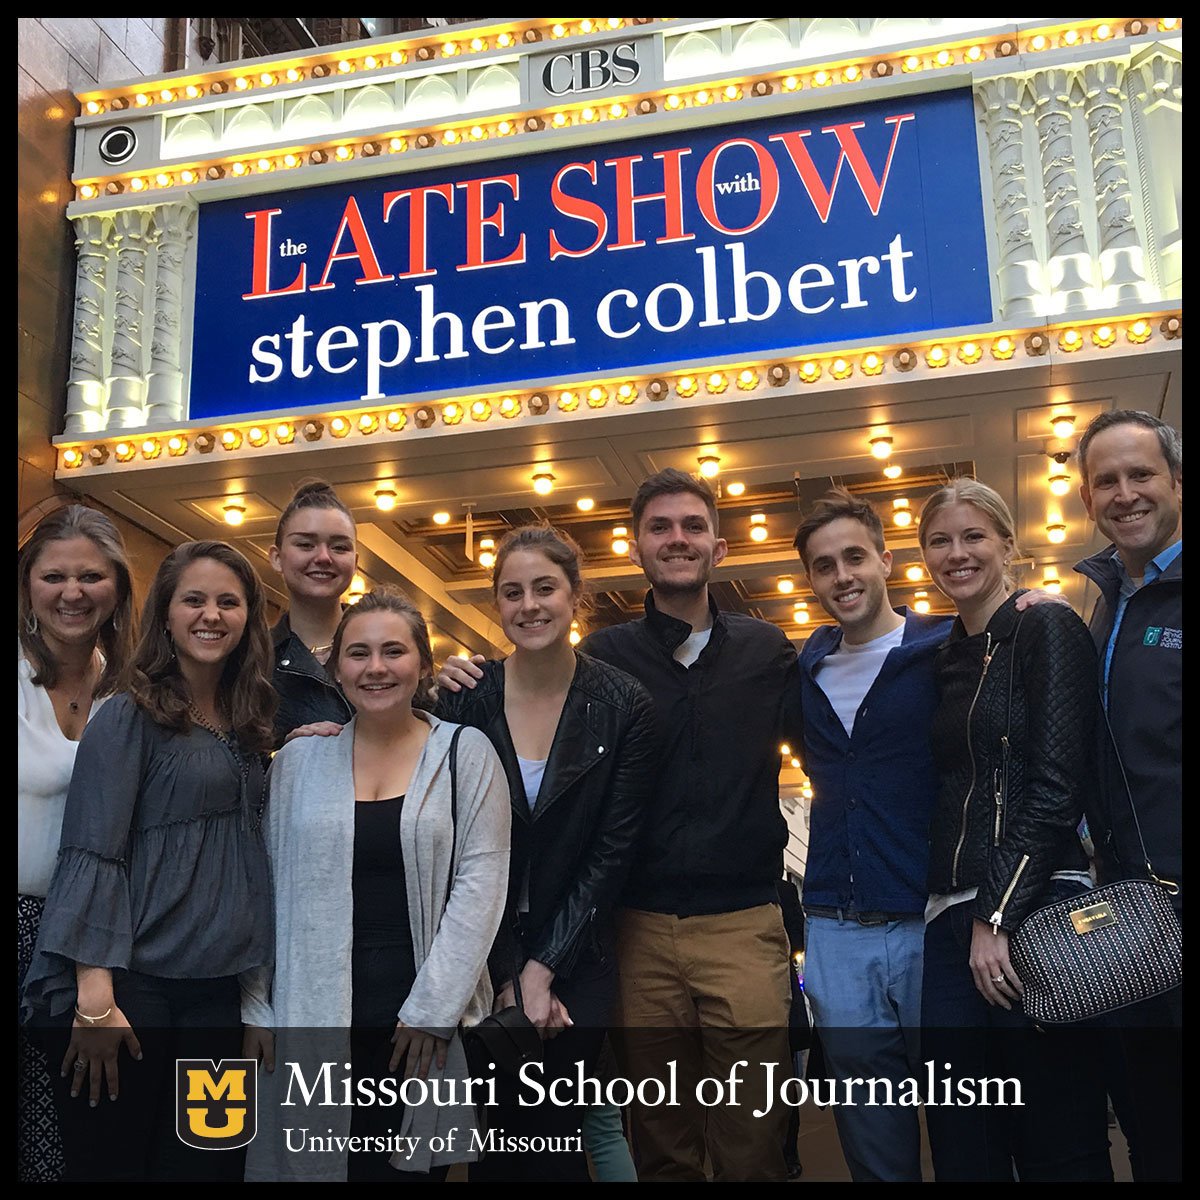 Students in New York Program Invited to Taping of 'The Late Show with Stephen Colbert'